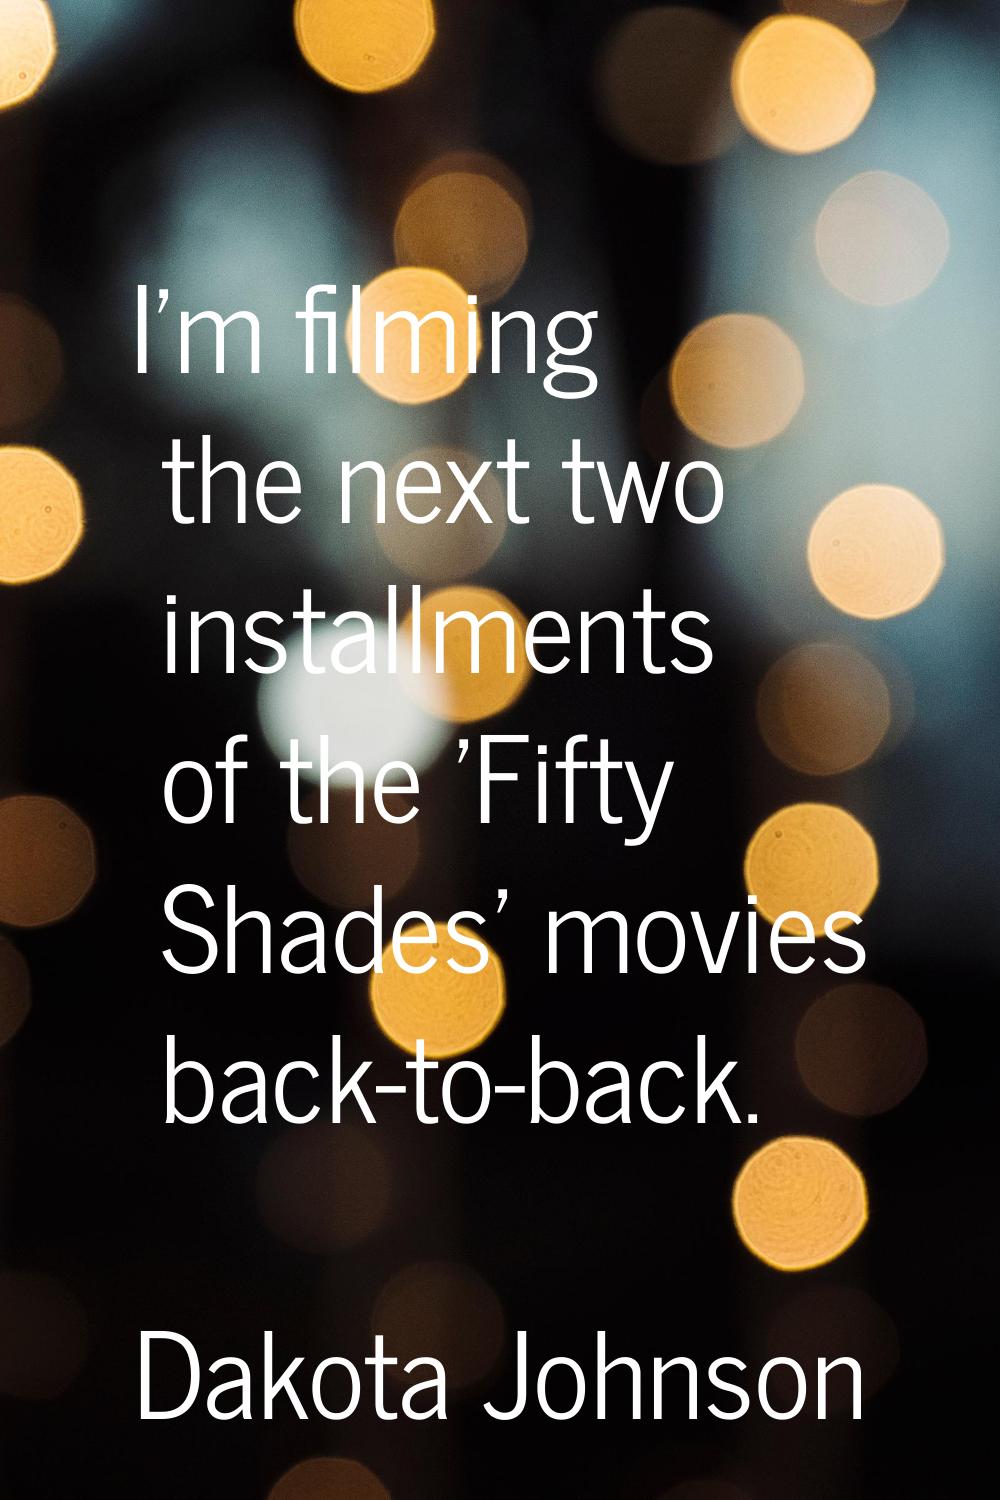 I'm filming the next two installments of the 'Fifty Shades' movies back-to-back.